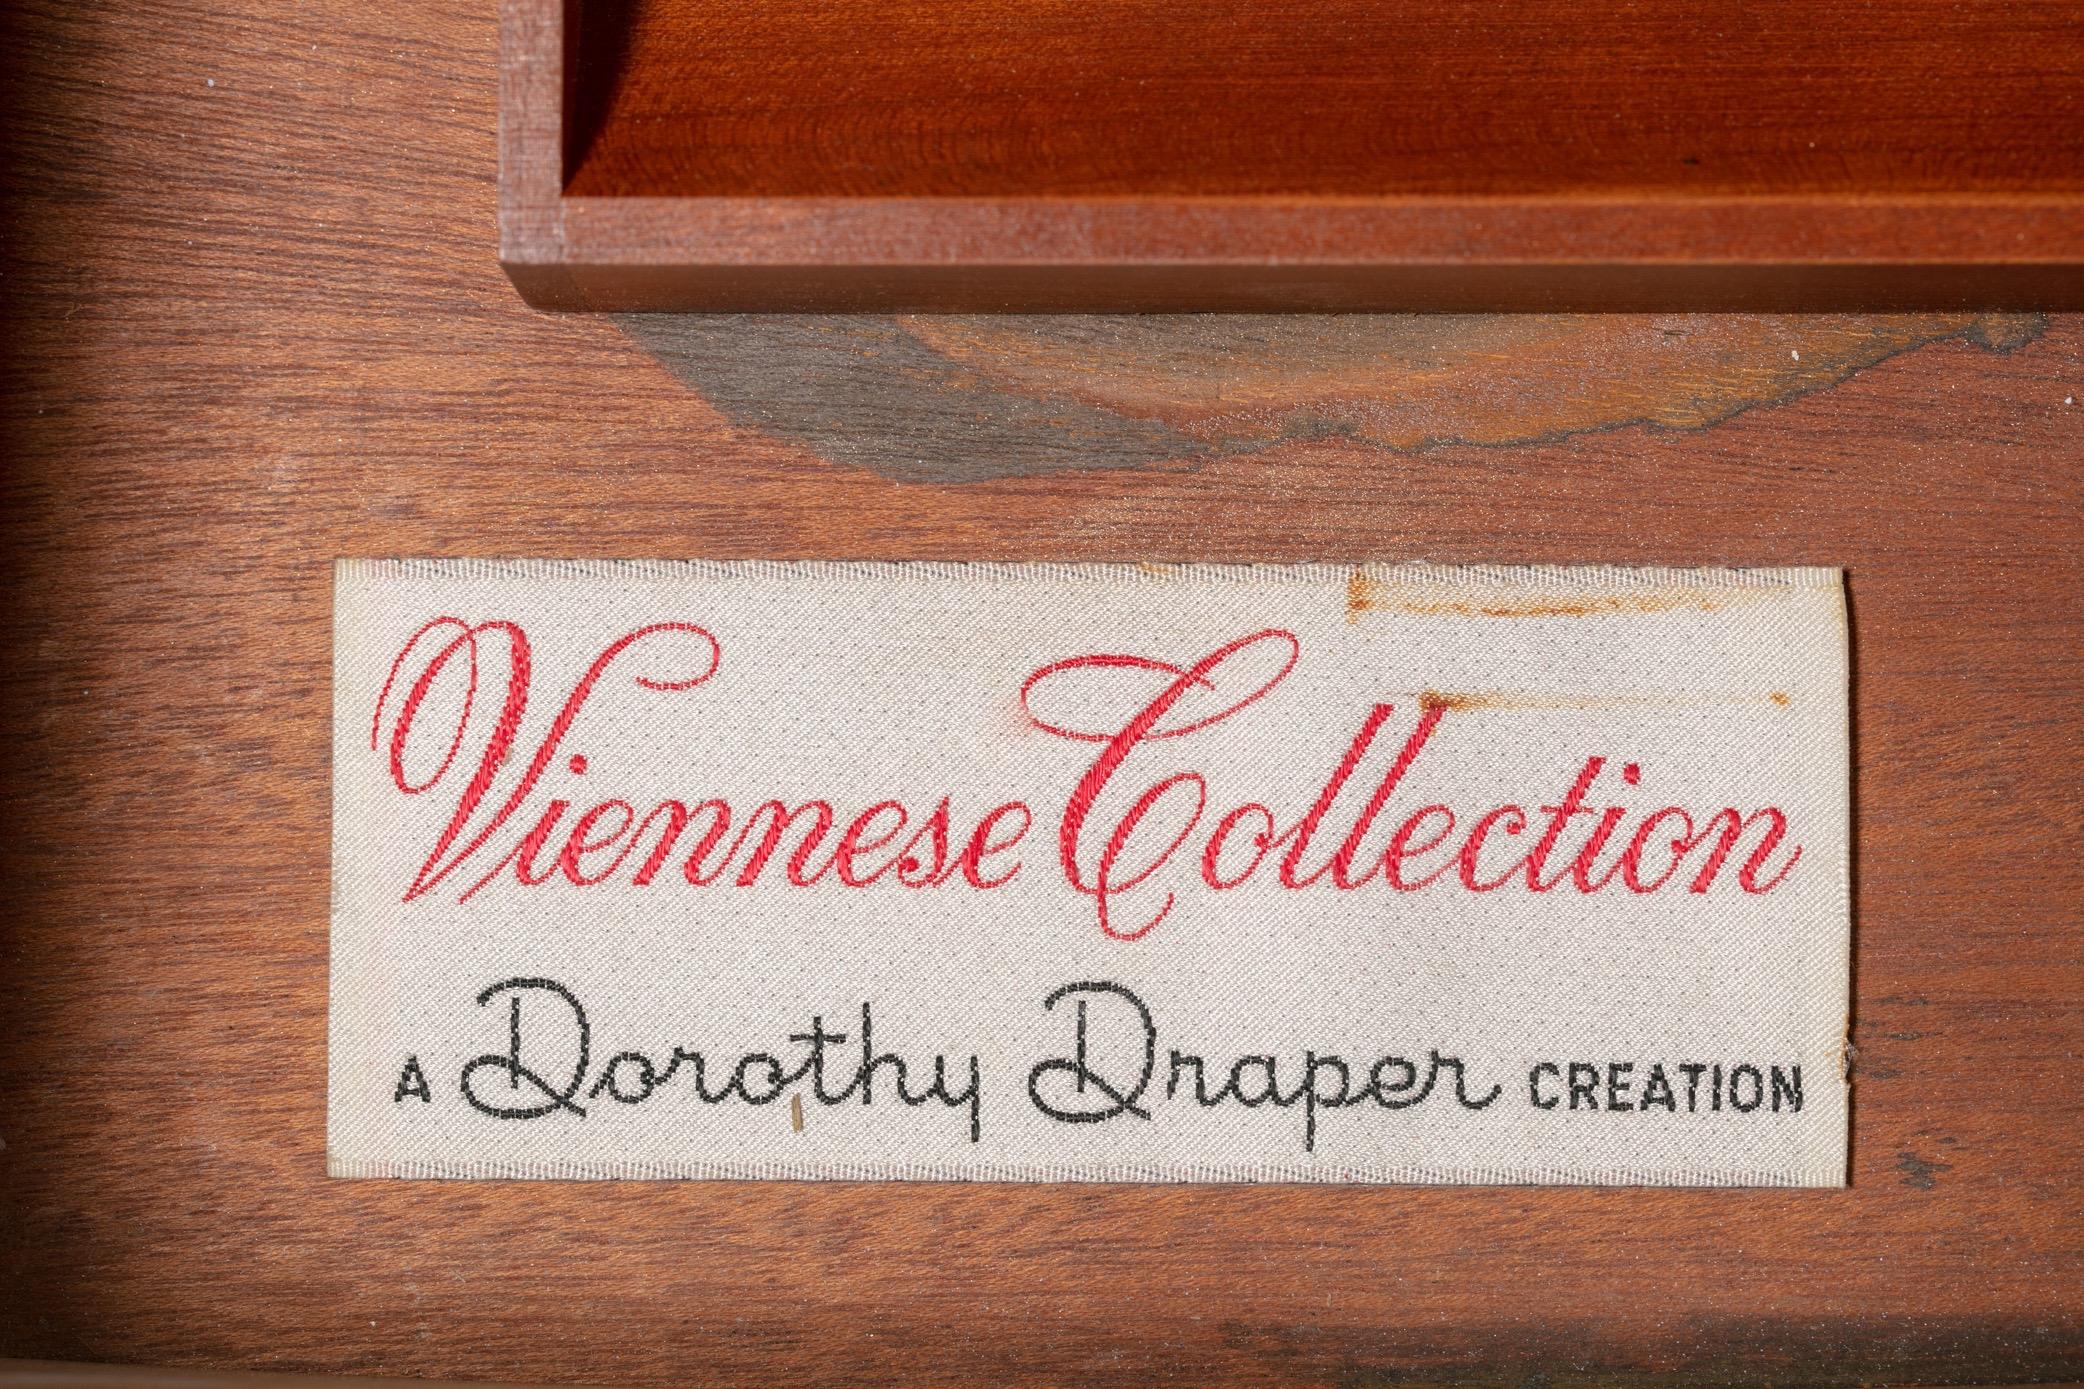 Dorothy Draper Viennese Collection Chest Lacquered in Ivory, circa 1963 8